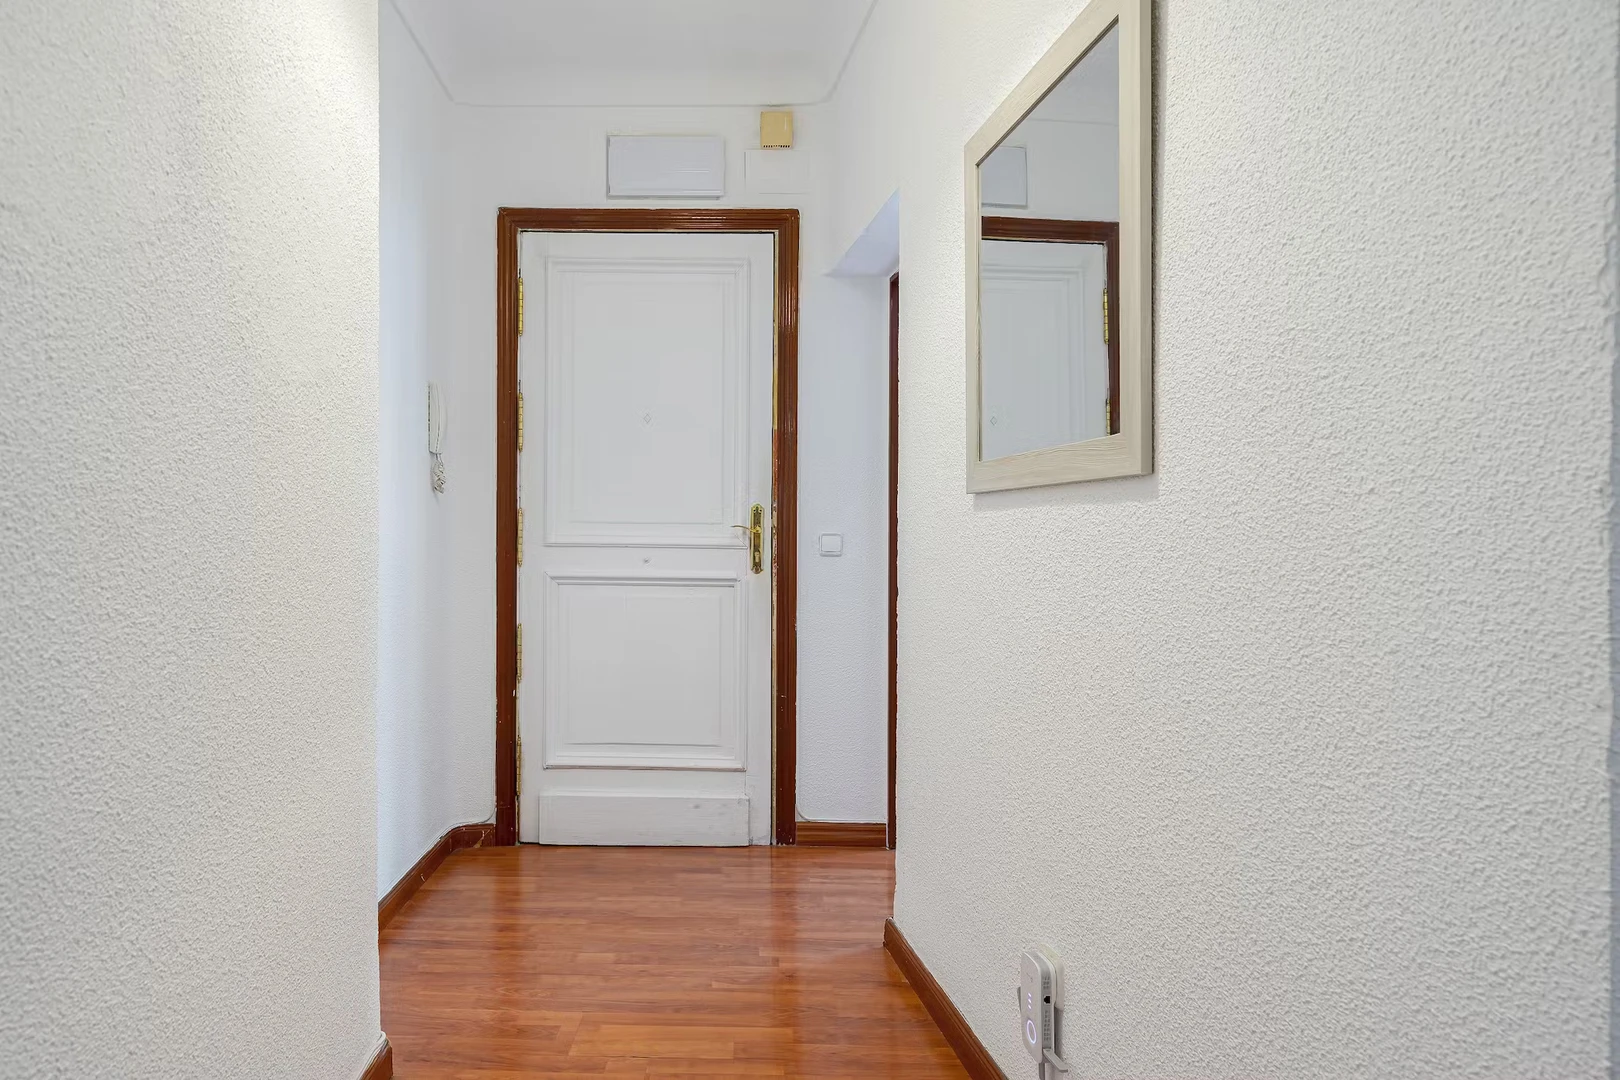 Room for rent in a shared flat in Alcalá De Henares